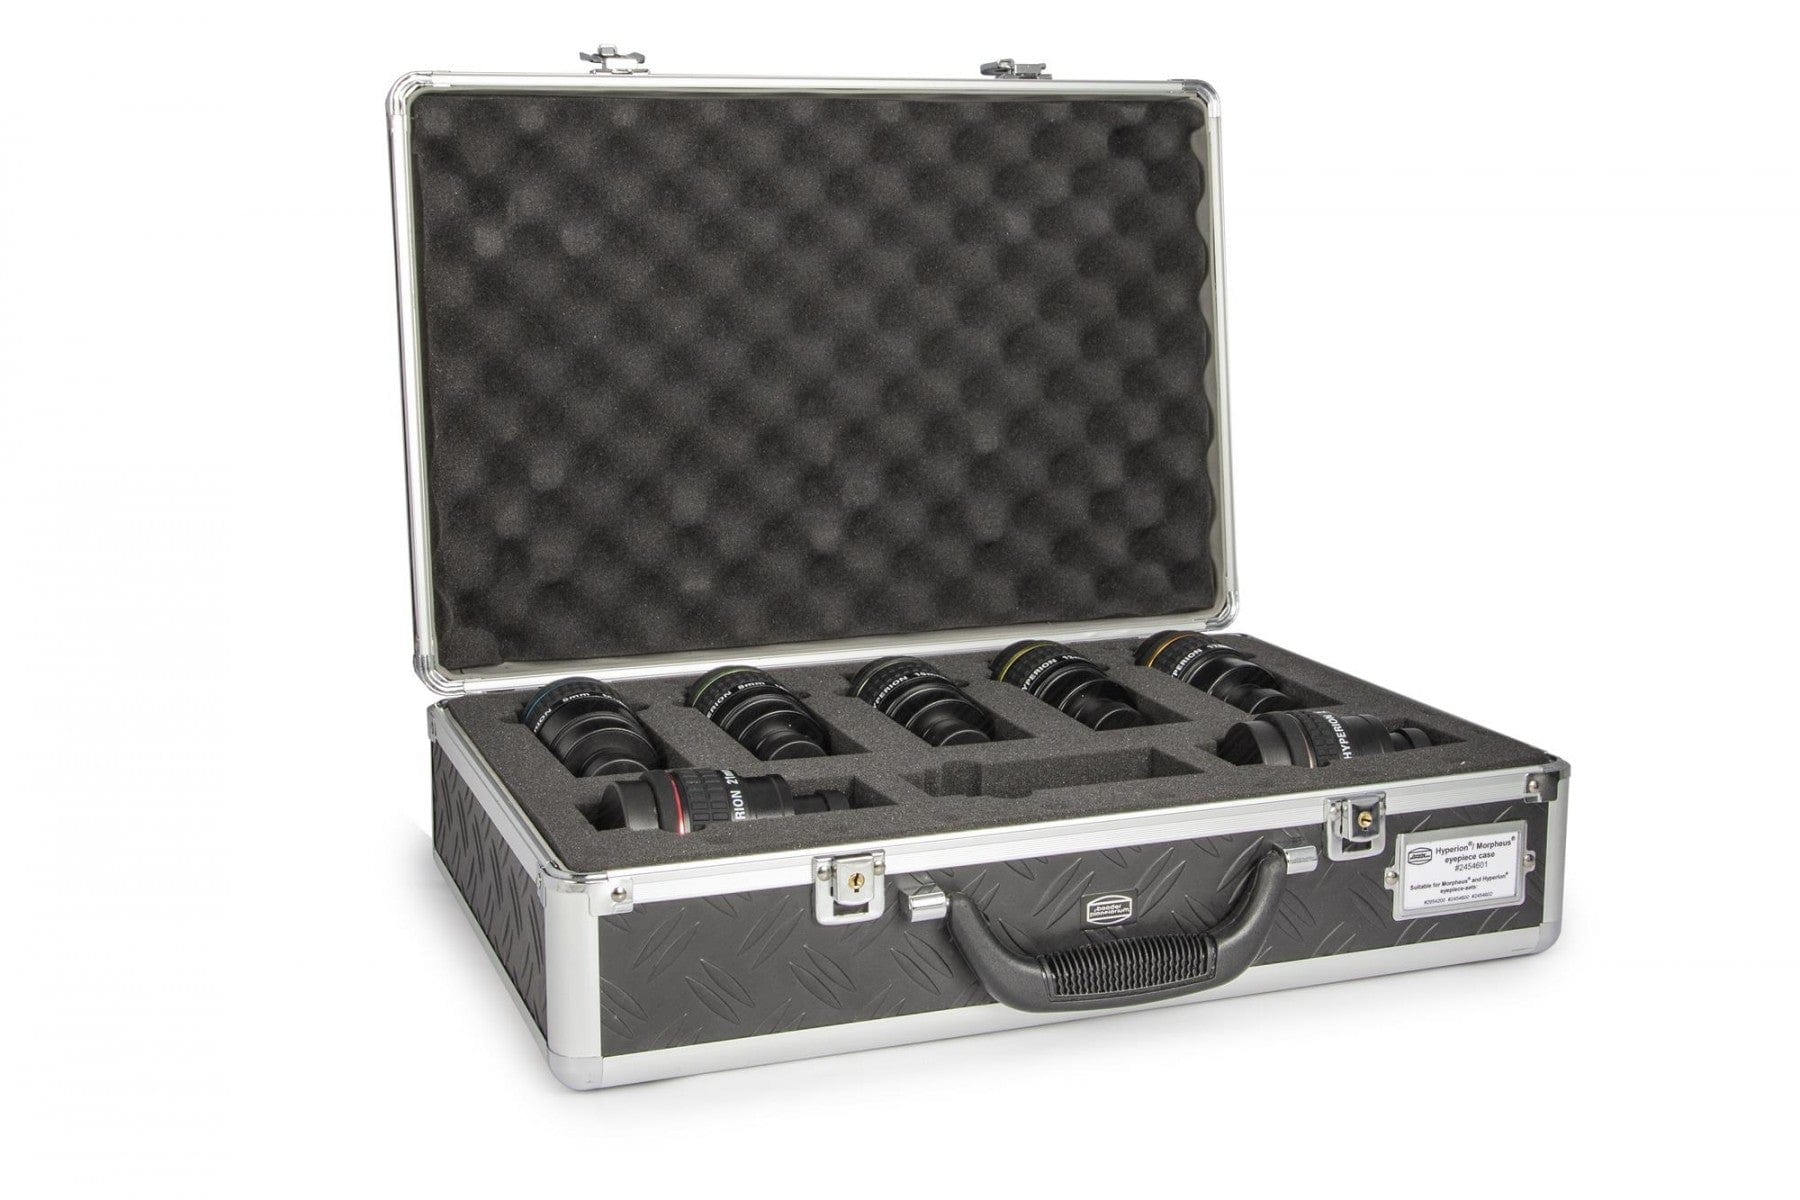 Baader Planetarium Accessory Baader Hyperion Eyepiece Case - Holds All 8 Hyperion Eyepieces (3.5/5/8/10/13/17/21/24) - 2454601